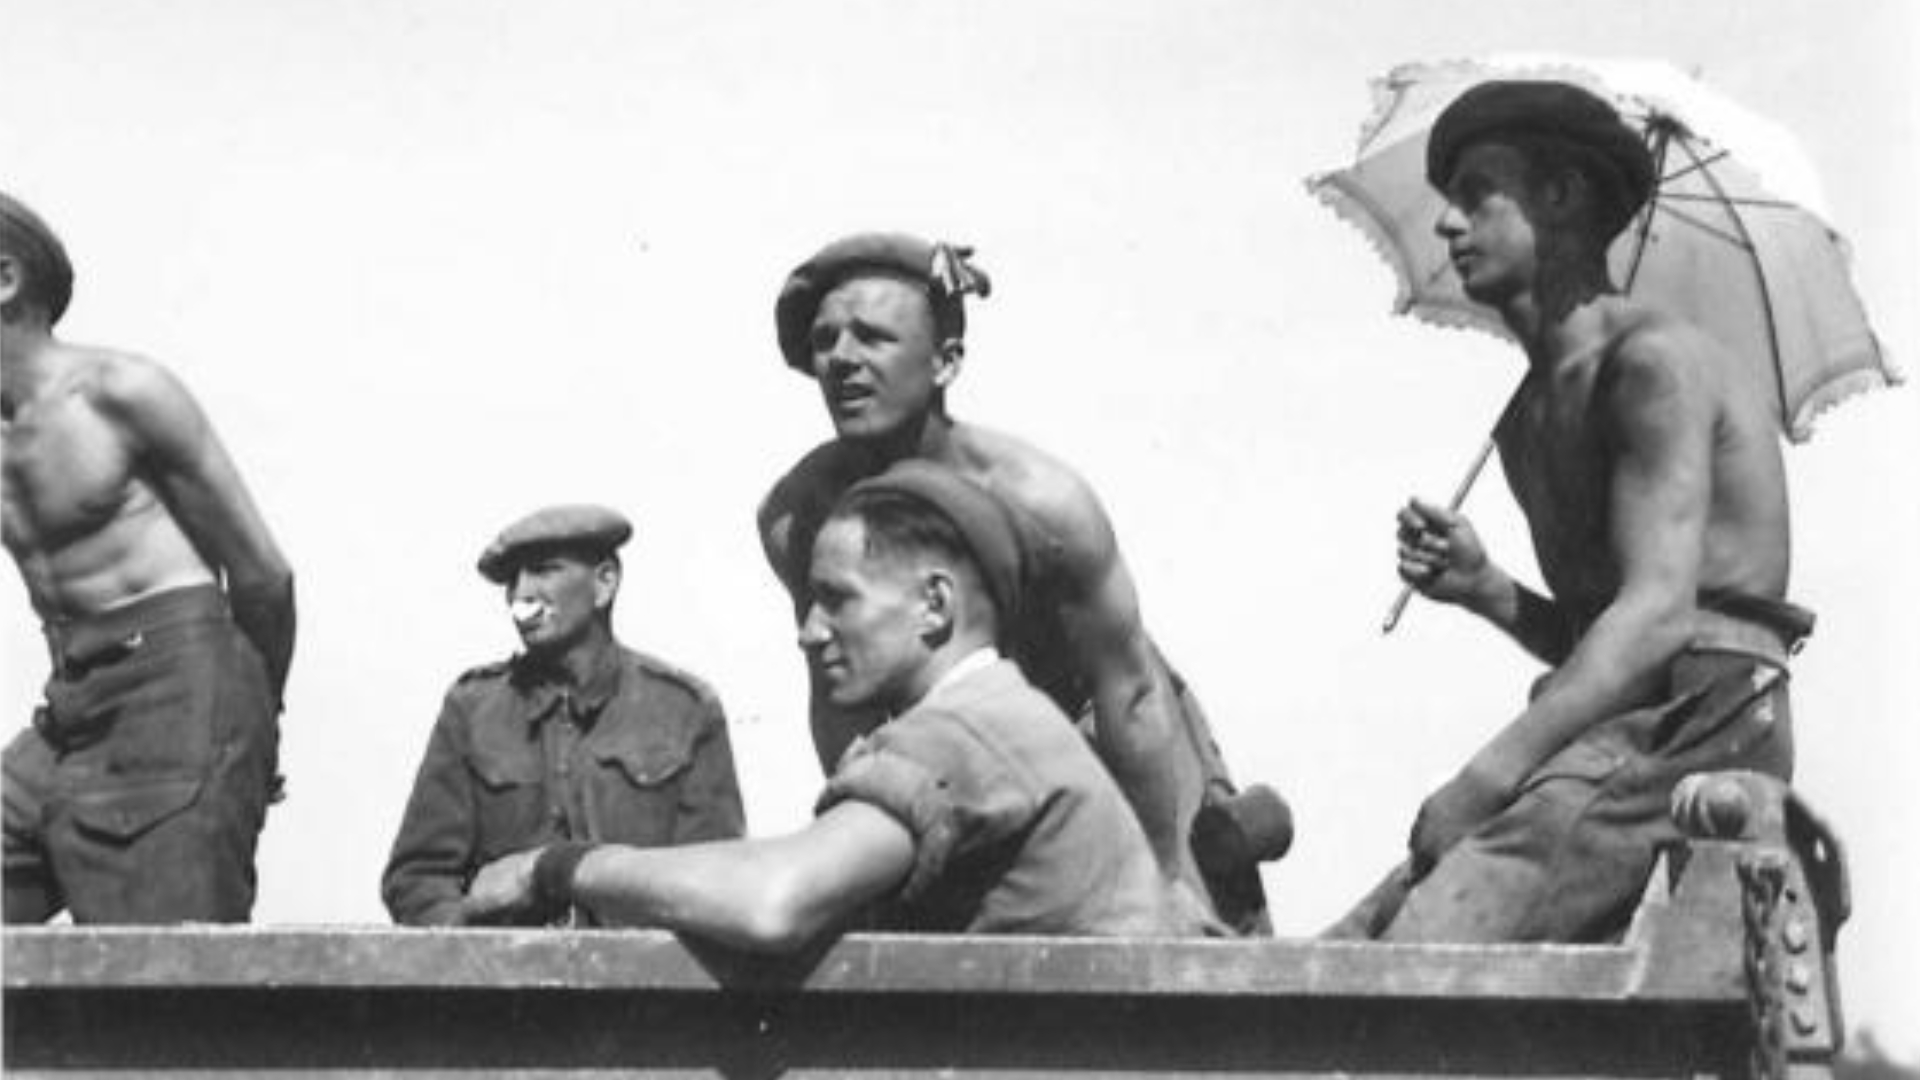 Five members of the Pioneer Corps on a lorry returning from construction work in Normandy, France. Private Charles Miles of Middlesborough, Yorkshire, England shelters from the sun beneath a parasol.